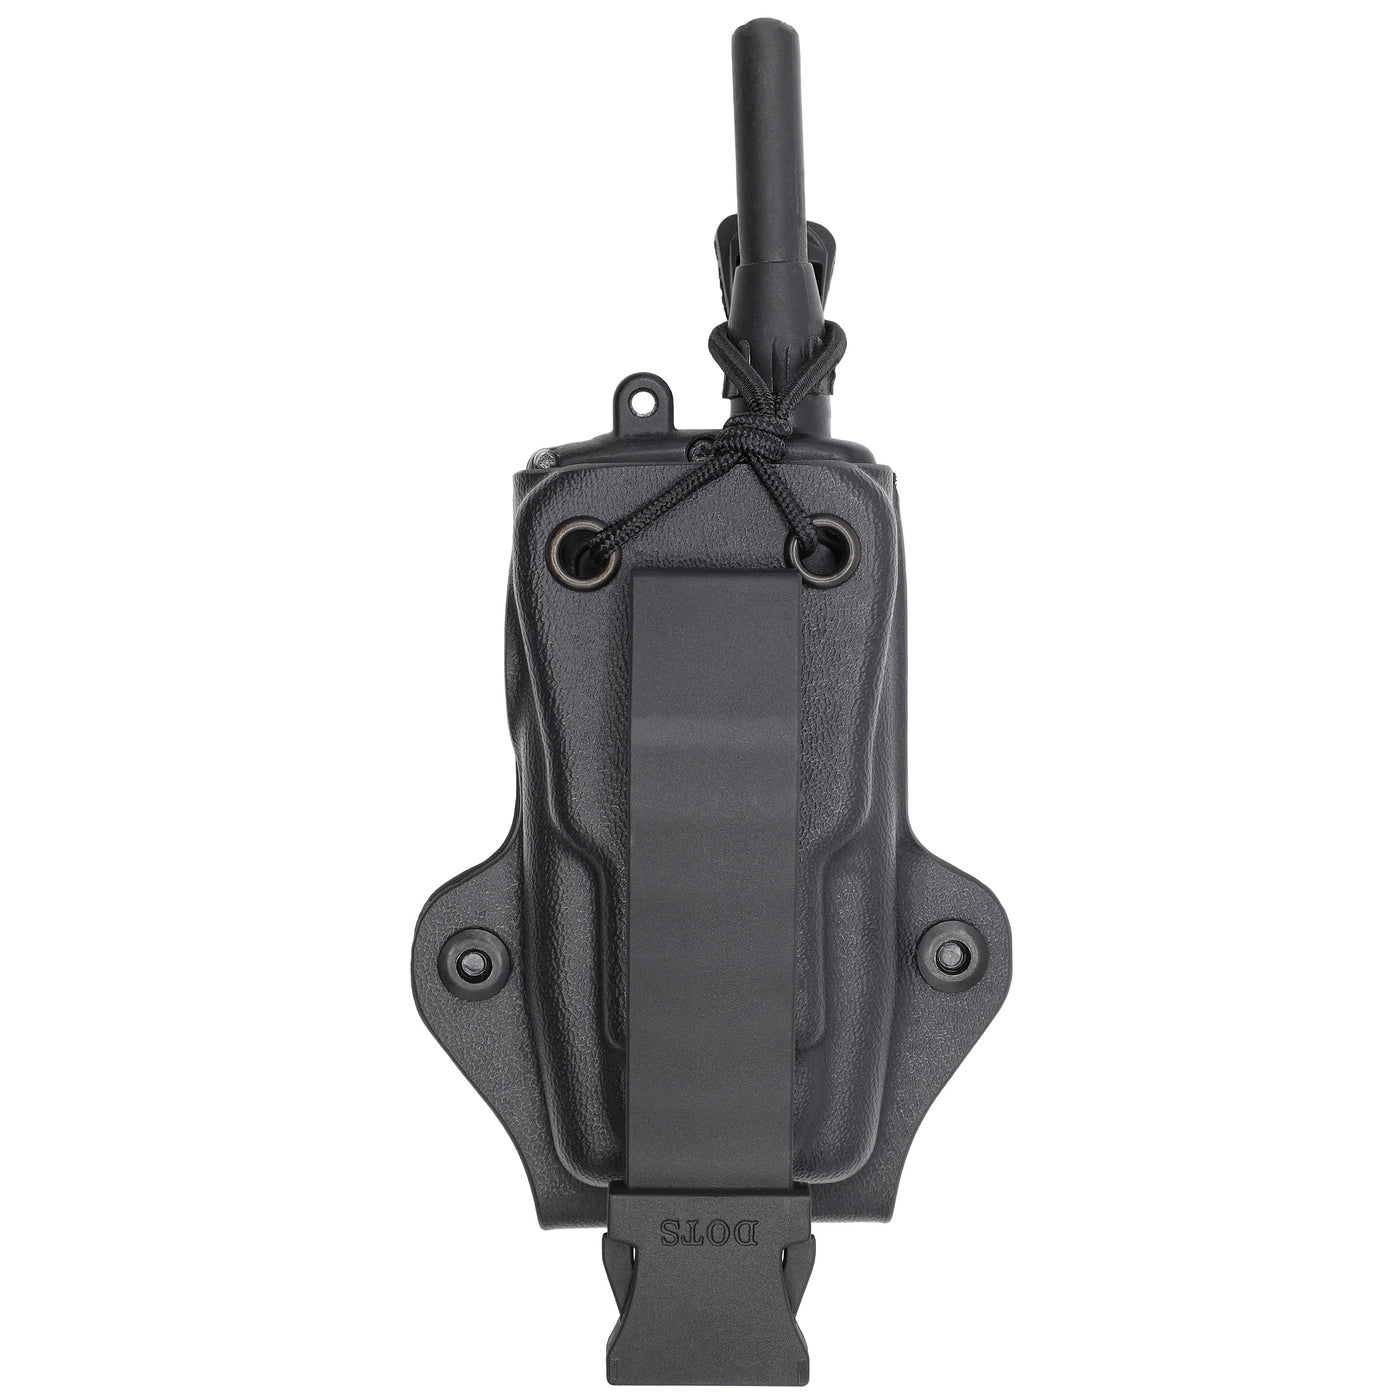 C&G Holsters SK-9 OWB E-Collar Remote Holder Dogtra Series MOLLE